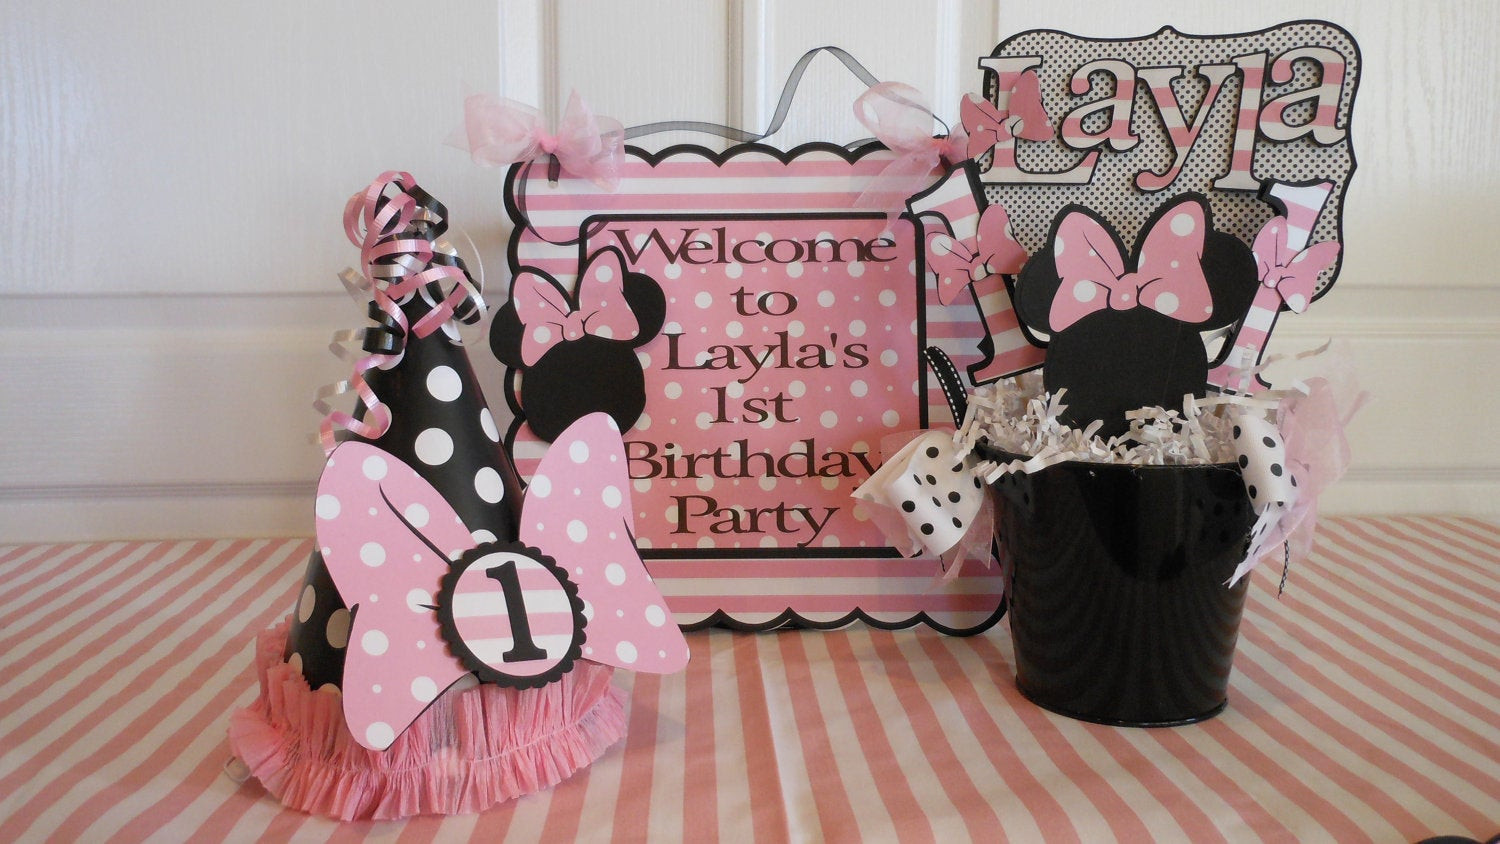 Minnie Mouse 1st Birthday Party Decorations
 Minnie Mouse Polka Dot 1st Birthday Party by ASweetCelebration